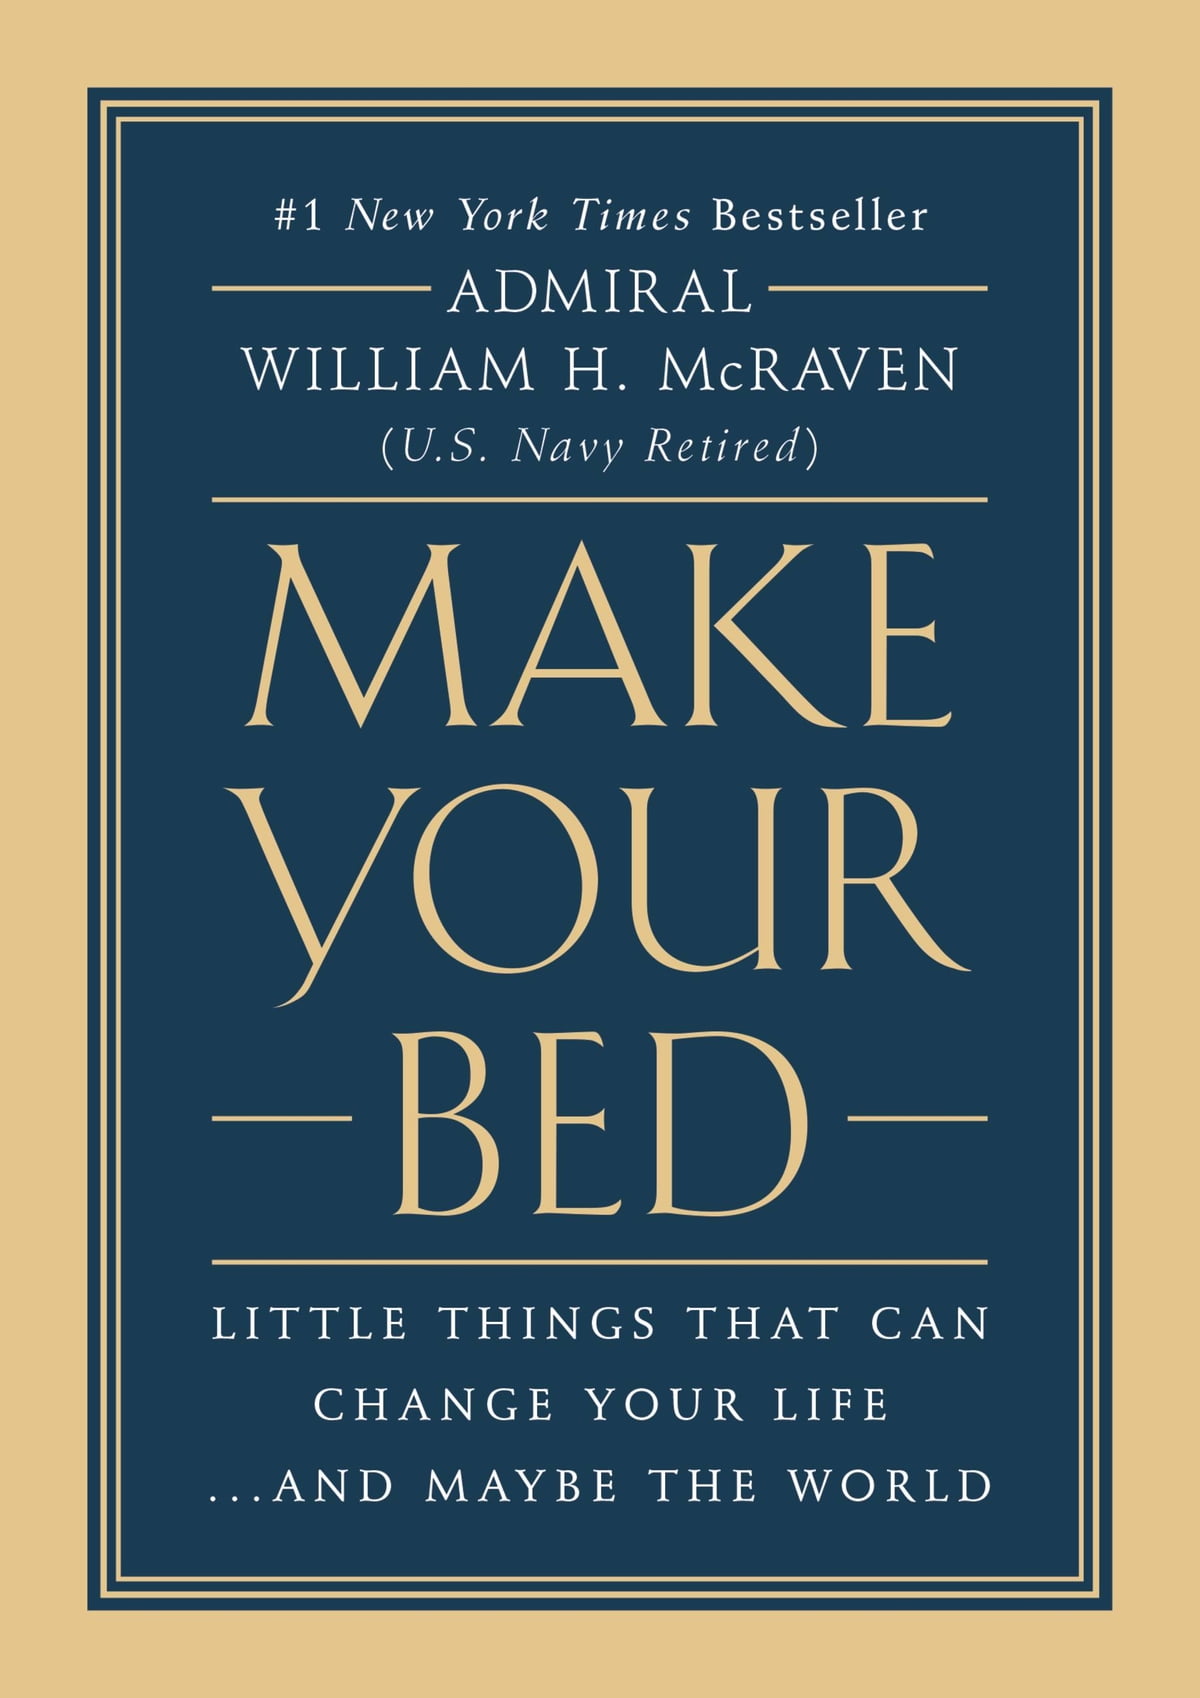 MAKE YOUR BED BY ADMIRAL WILLIAM H. MACRAVEN